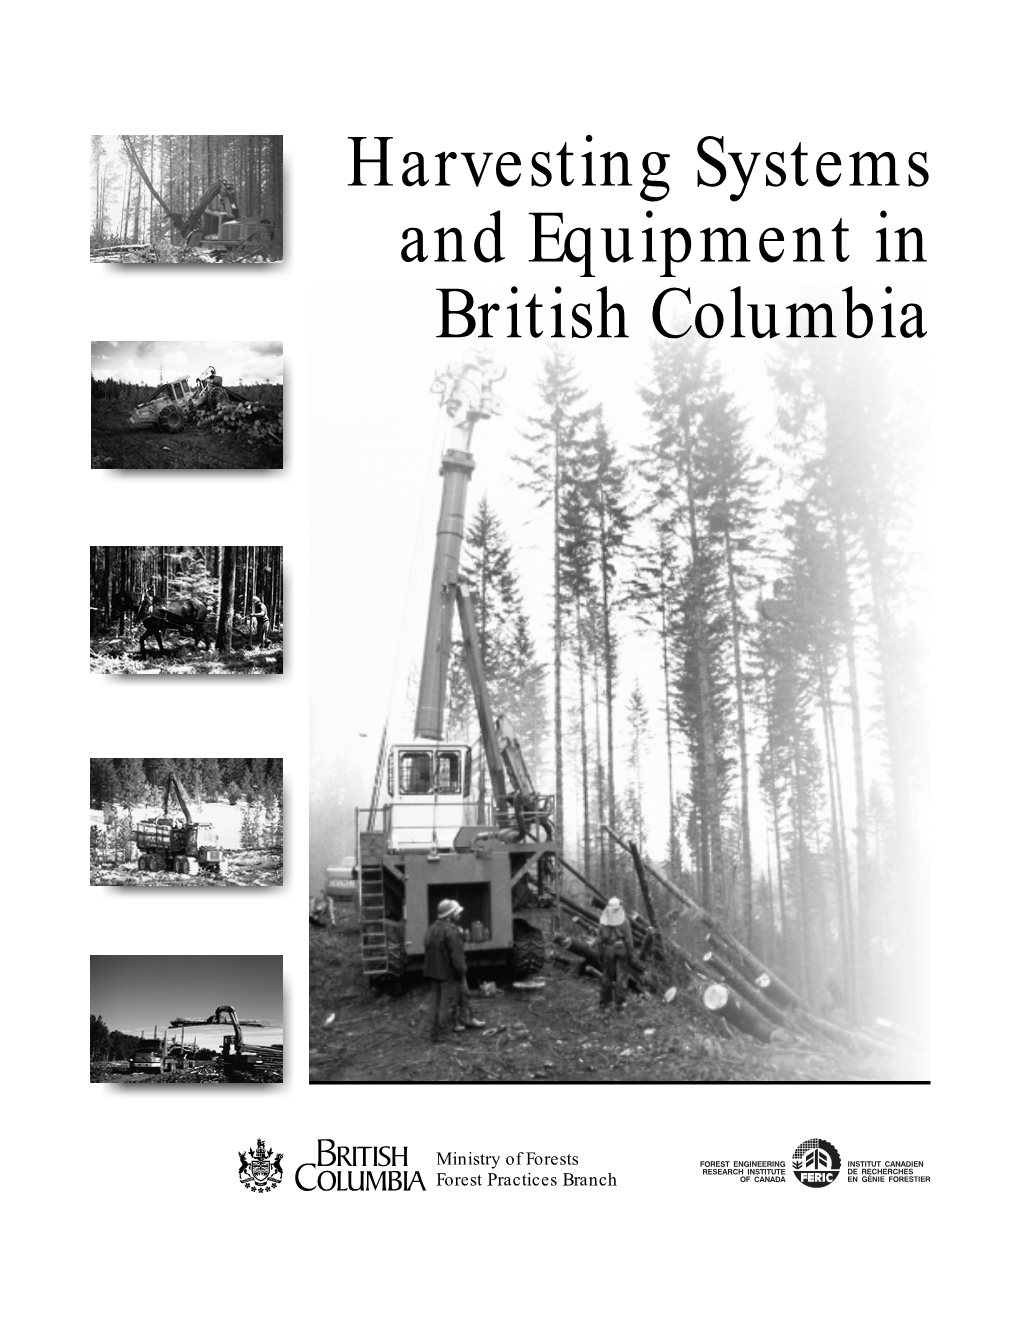 Harvesting Systems and Equipment in British Columbia